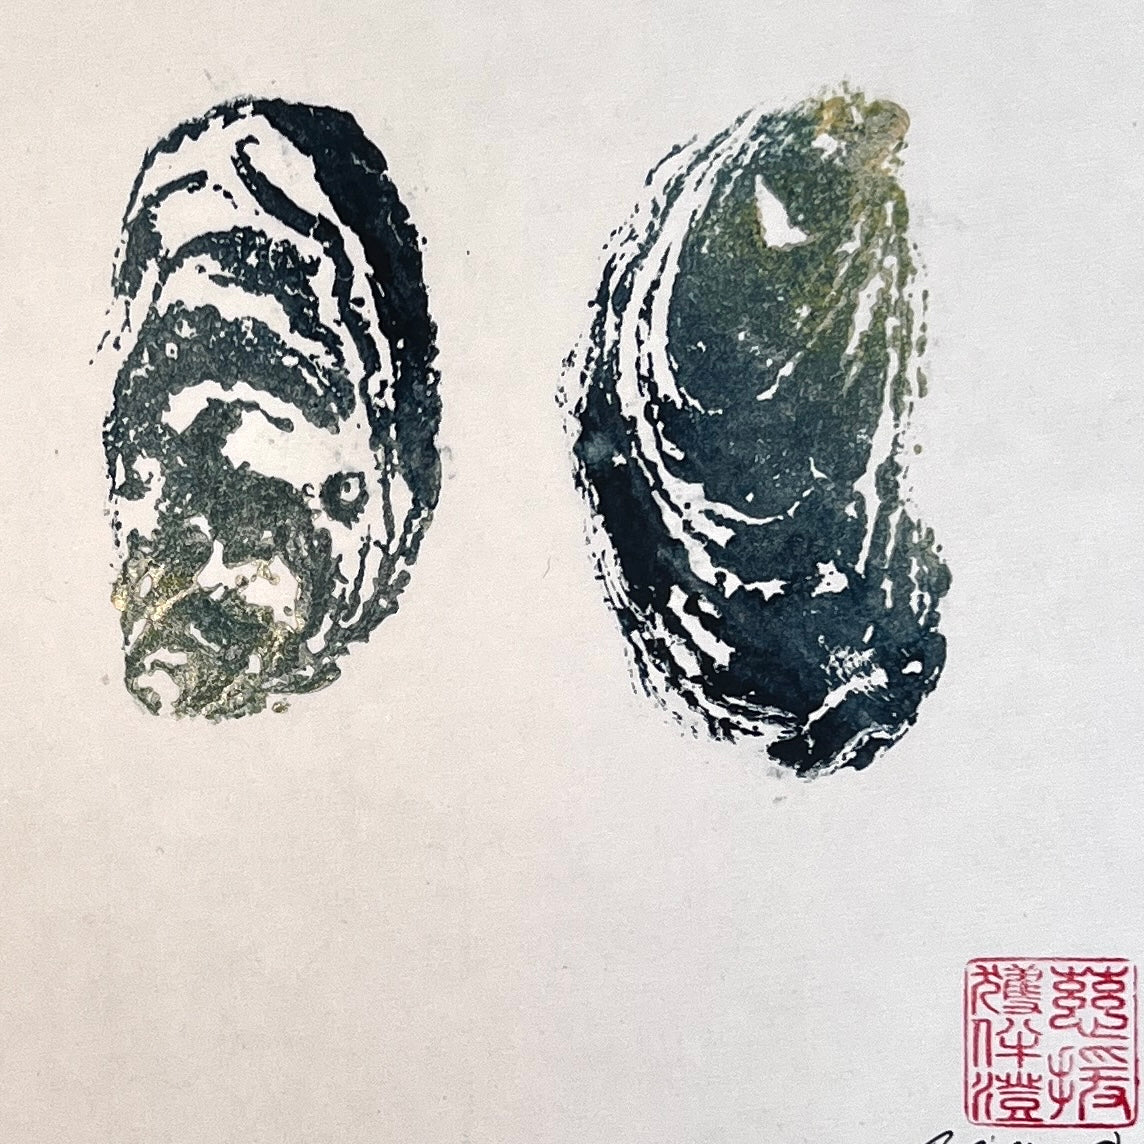 Gyotaku Impression taken from the surface of Pacific Oyster Shells